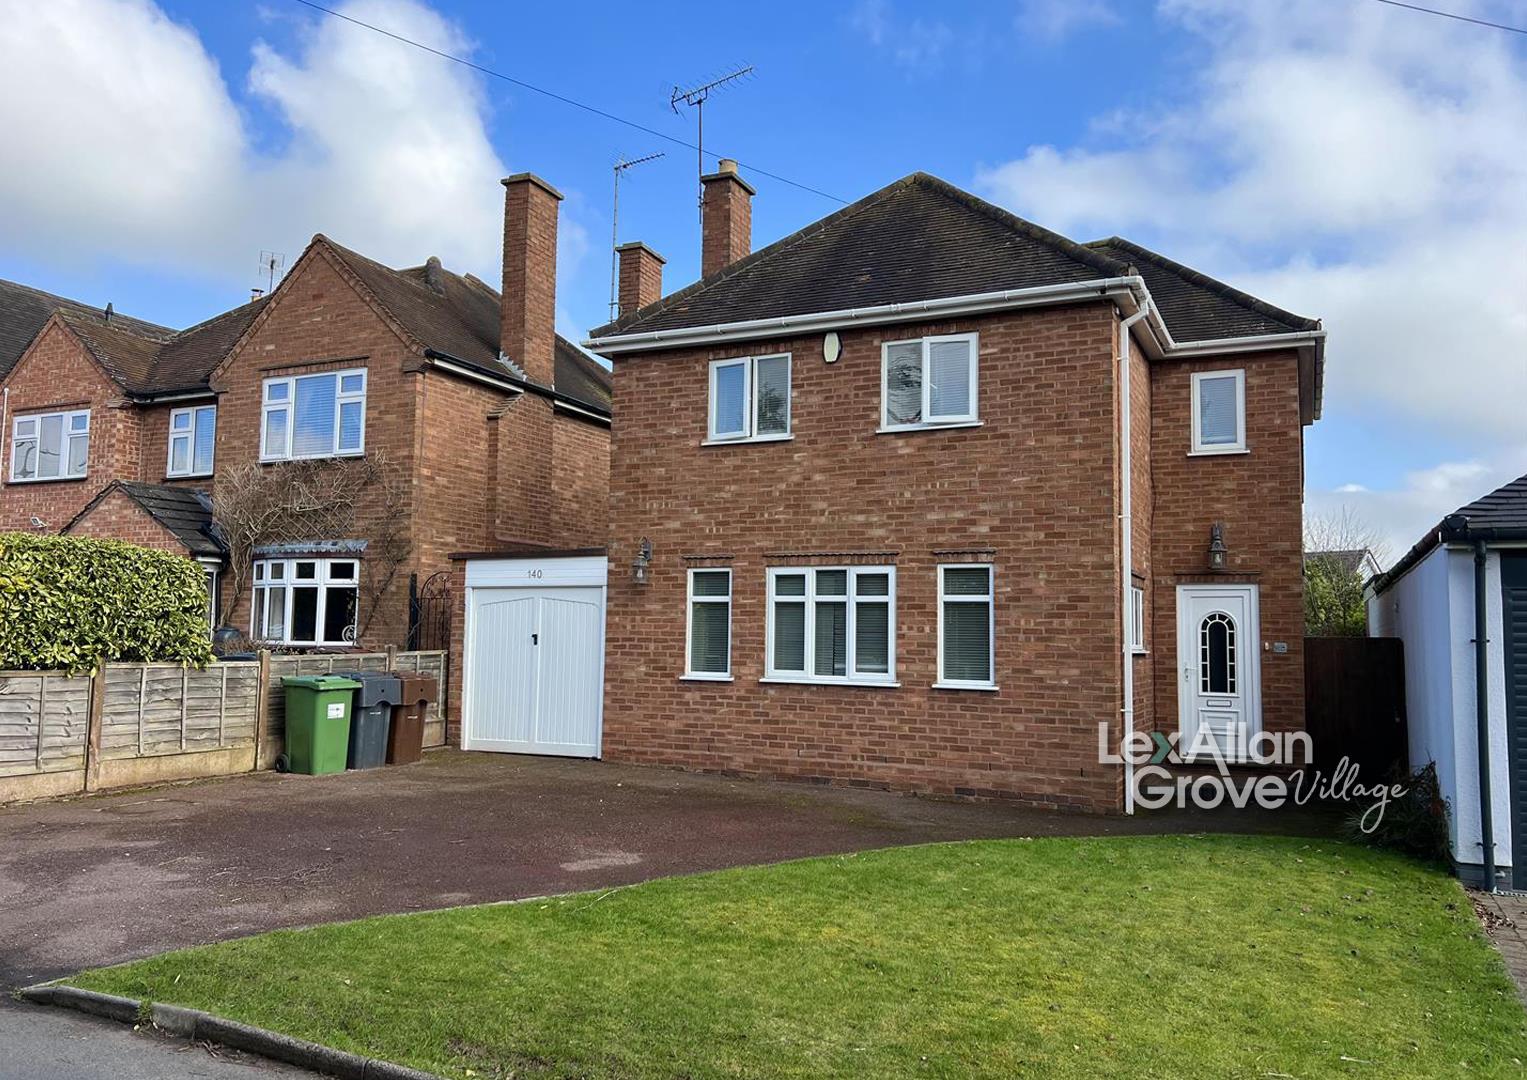 3 bed house for sale in Worcester Road, Stourbridge - Property Image 1